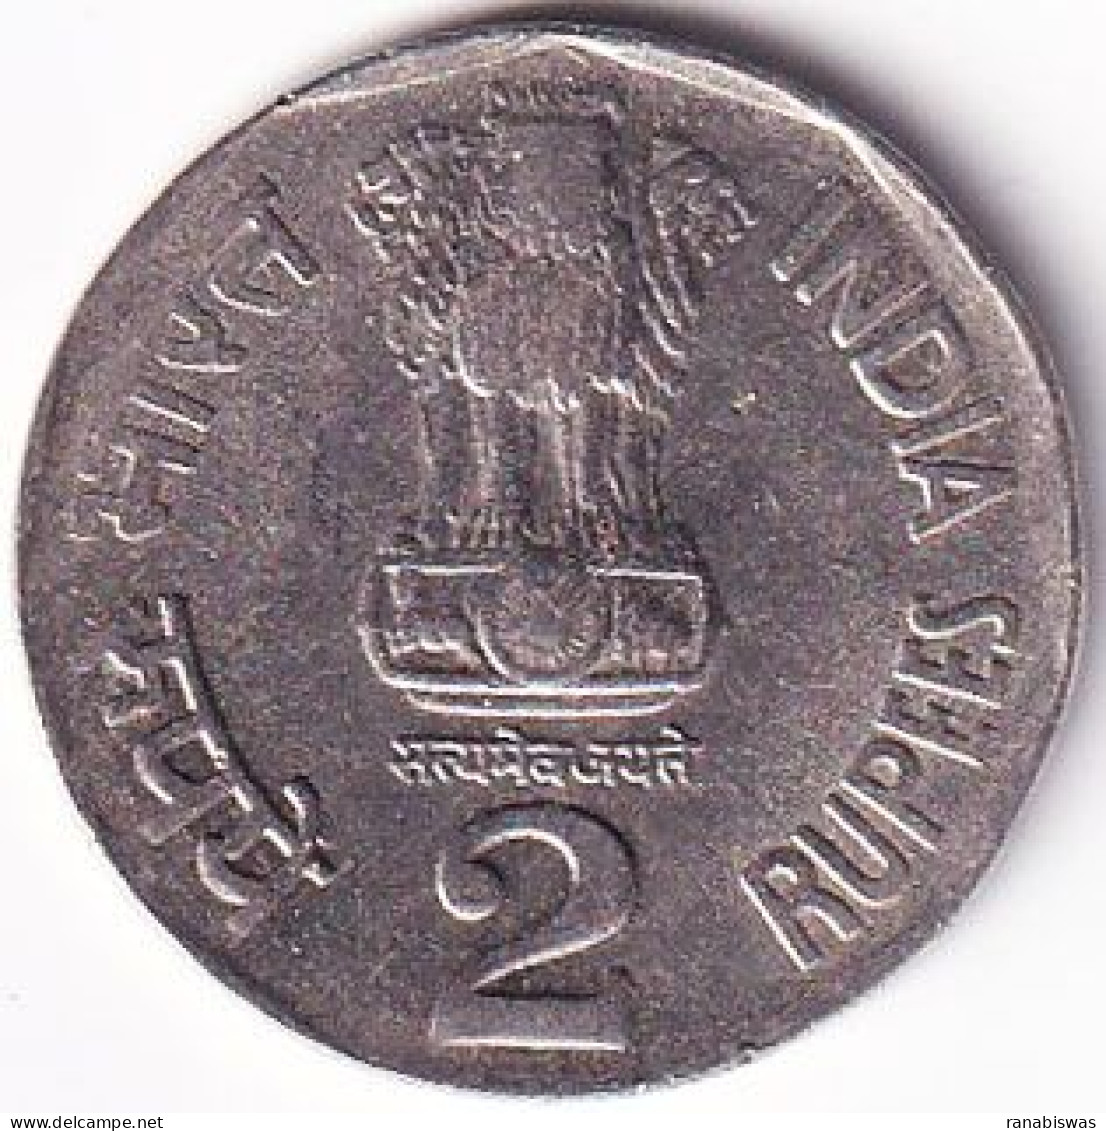 INDIA COIN LOT 36, 2 RUPEES 1993, WORLD FOOD DAY, FAO, HYDERABAD MINT, XF, SCARE - India